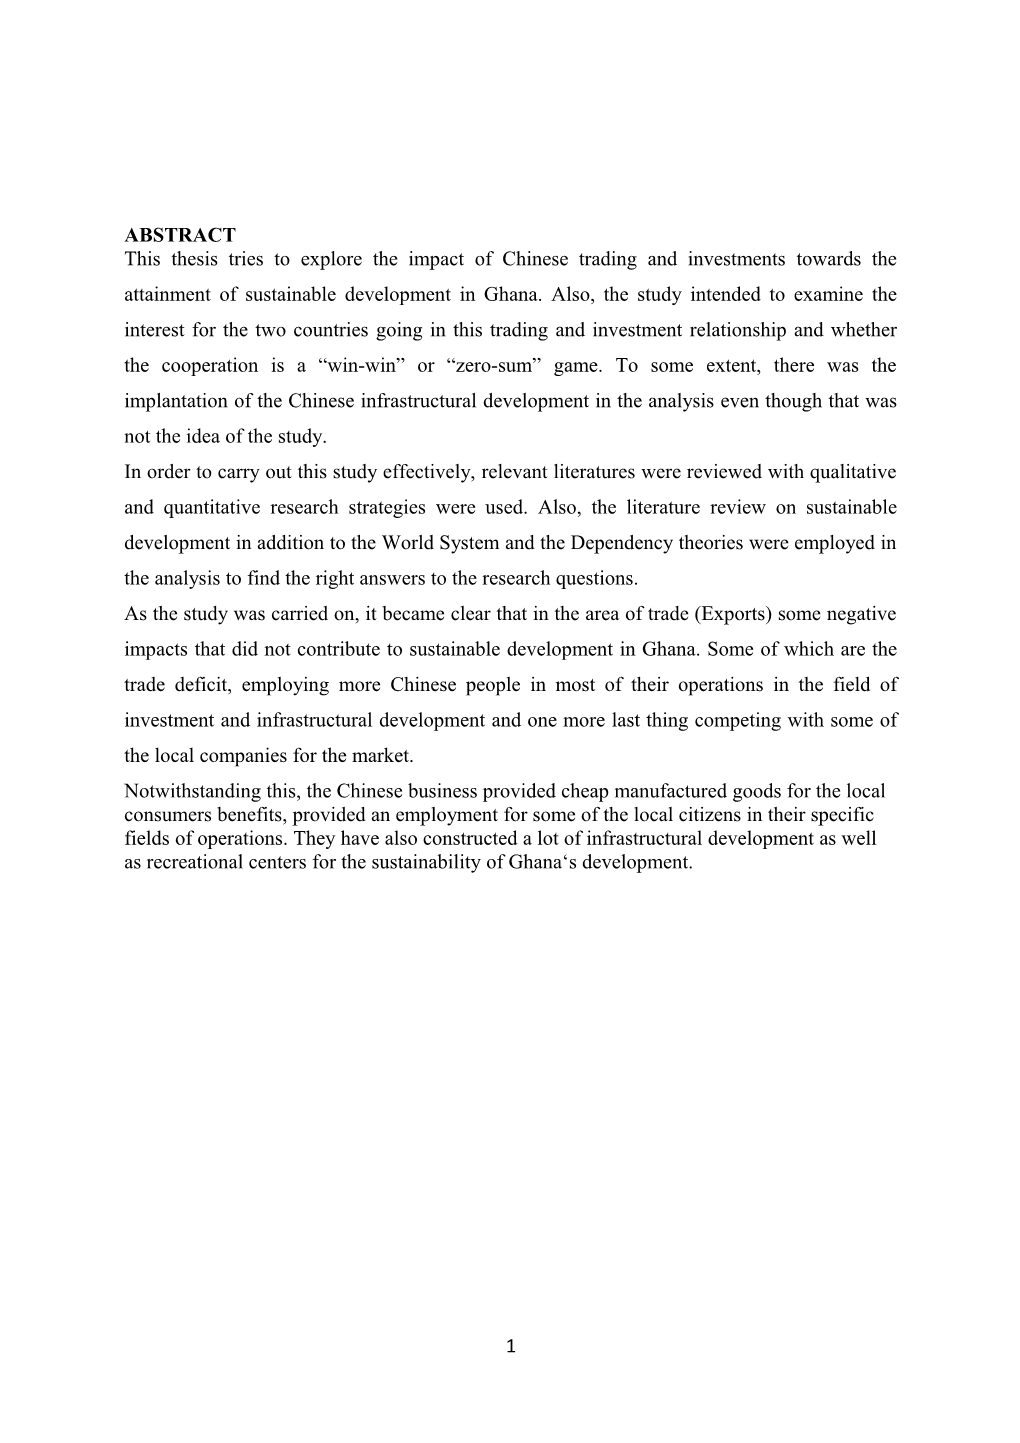 This Thesis Tries to Explore the Impact of Chinese Trading and Investments Towards The